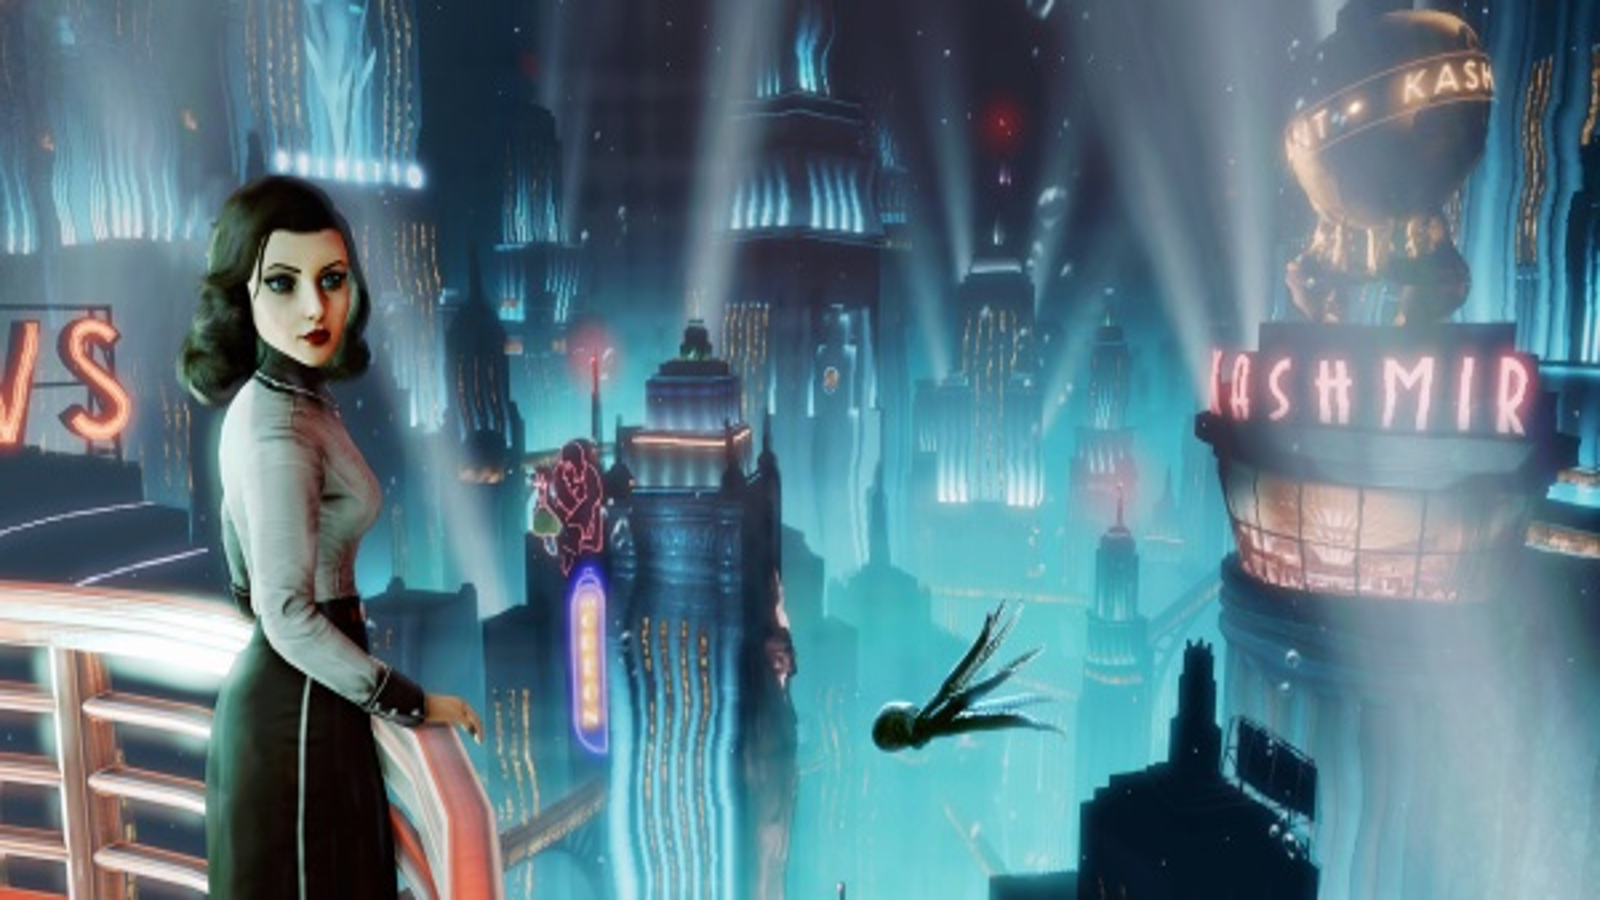 BioShock Infinite' Clash In The Clouds DLC Review (PC)